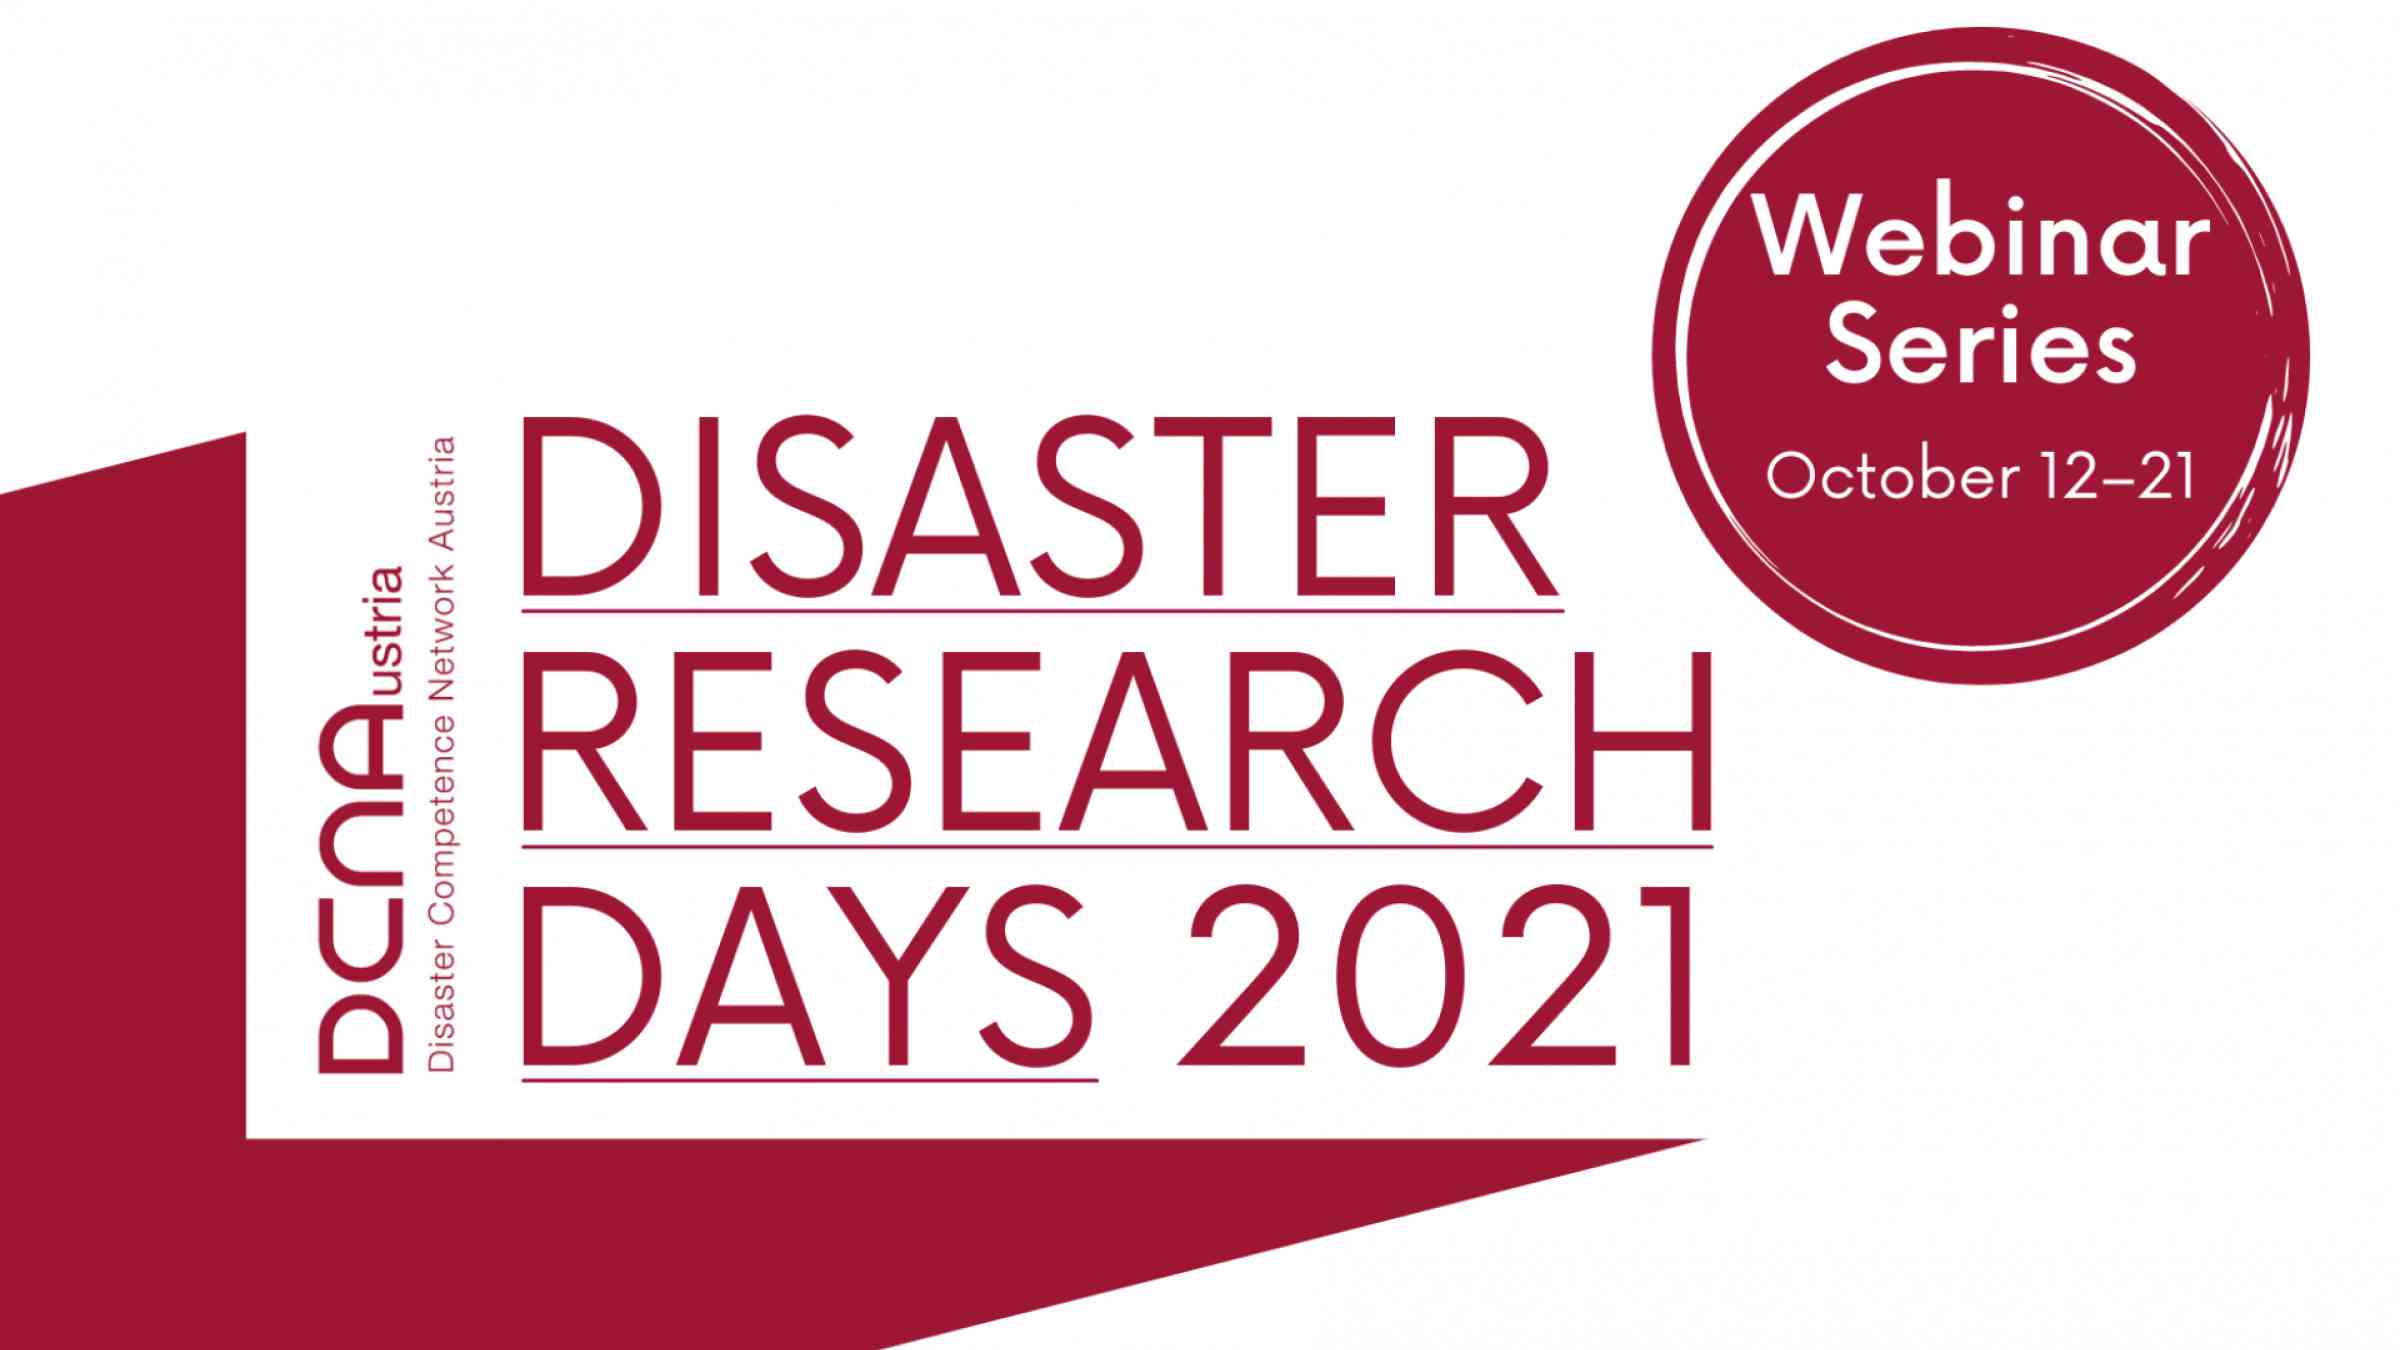 Disaster Research Days 2021